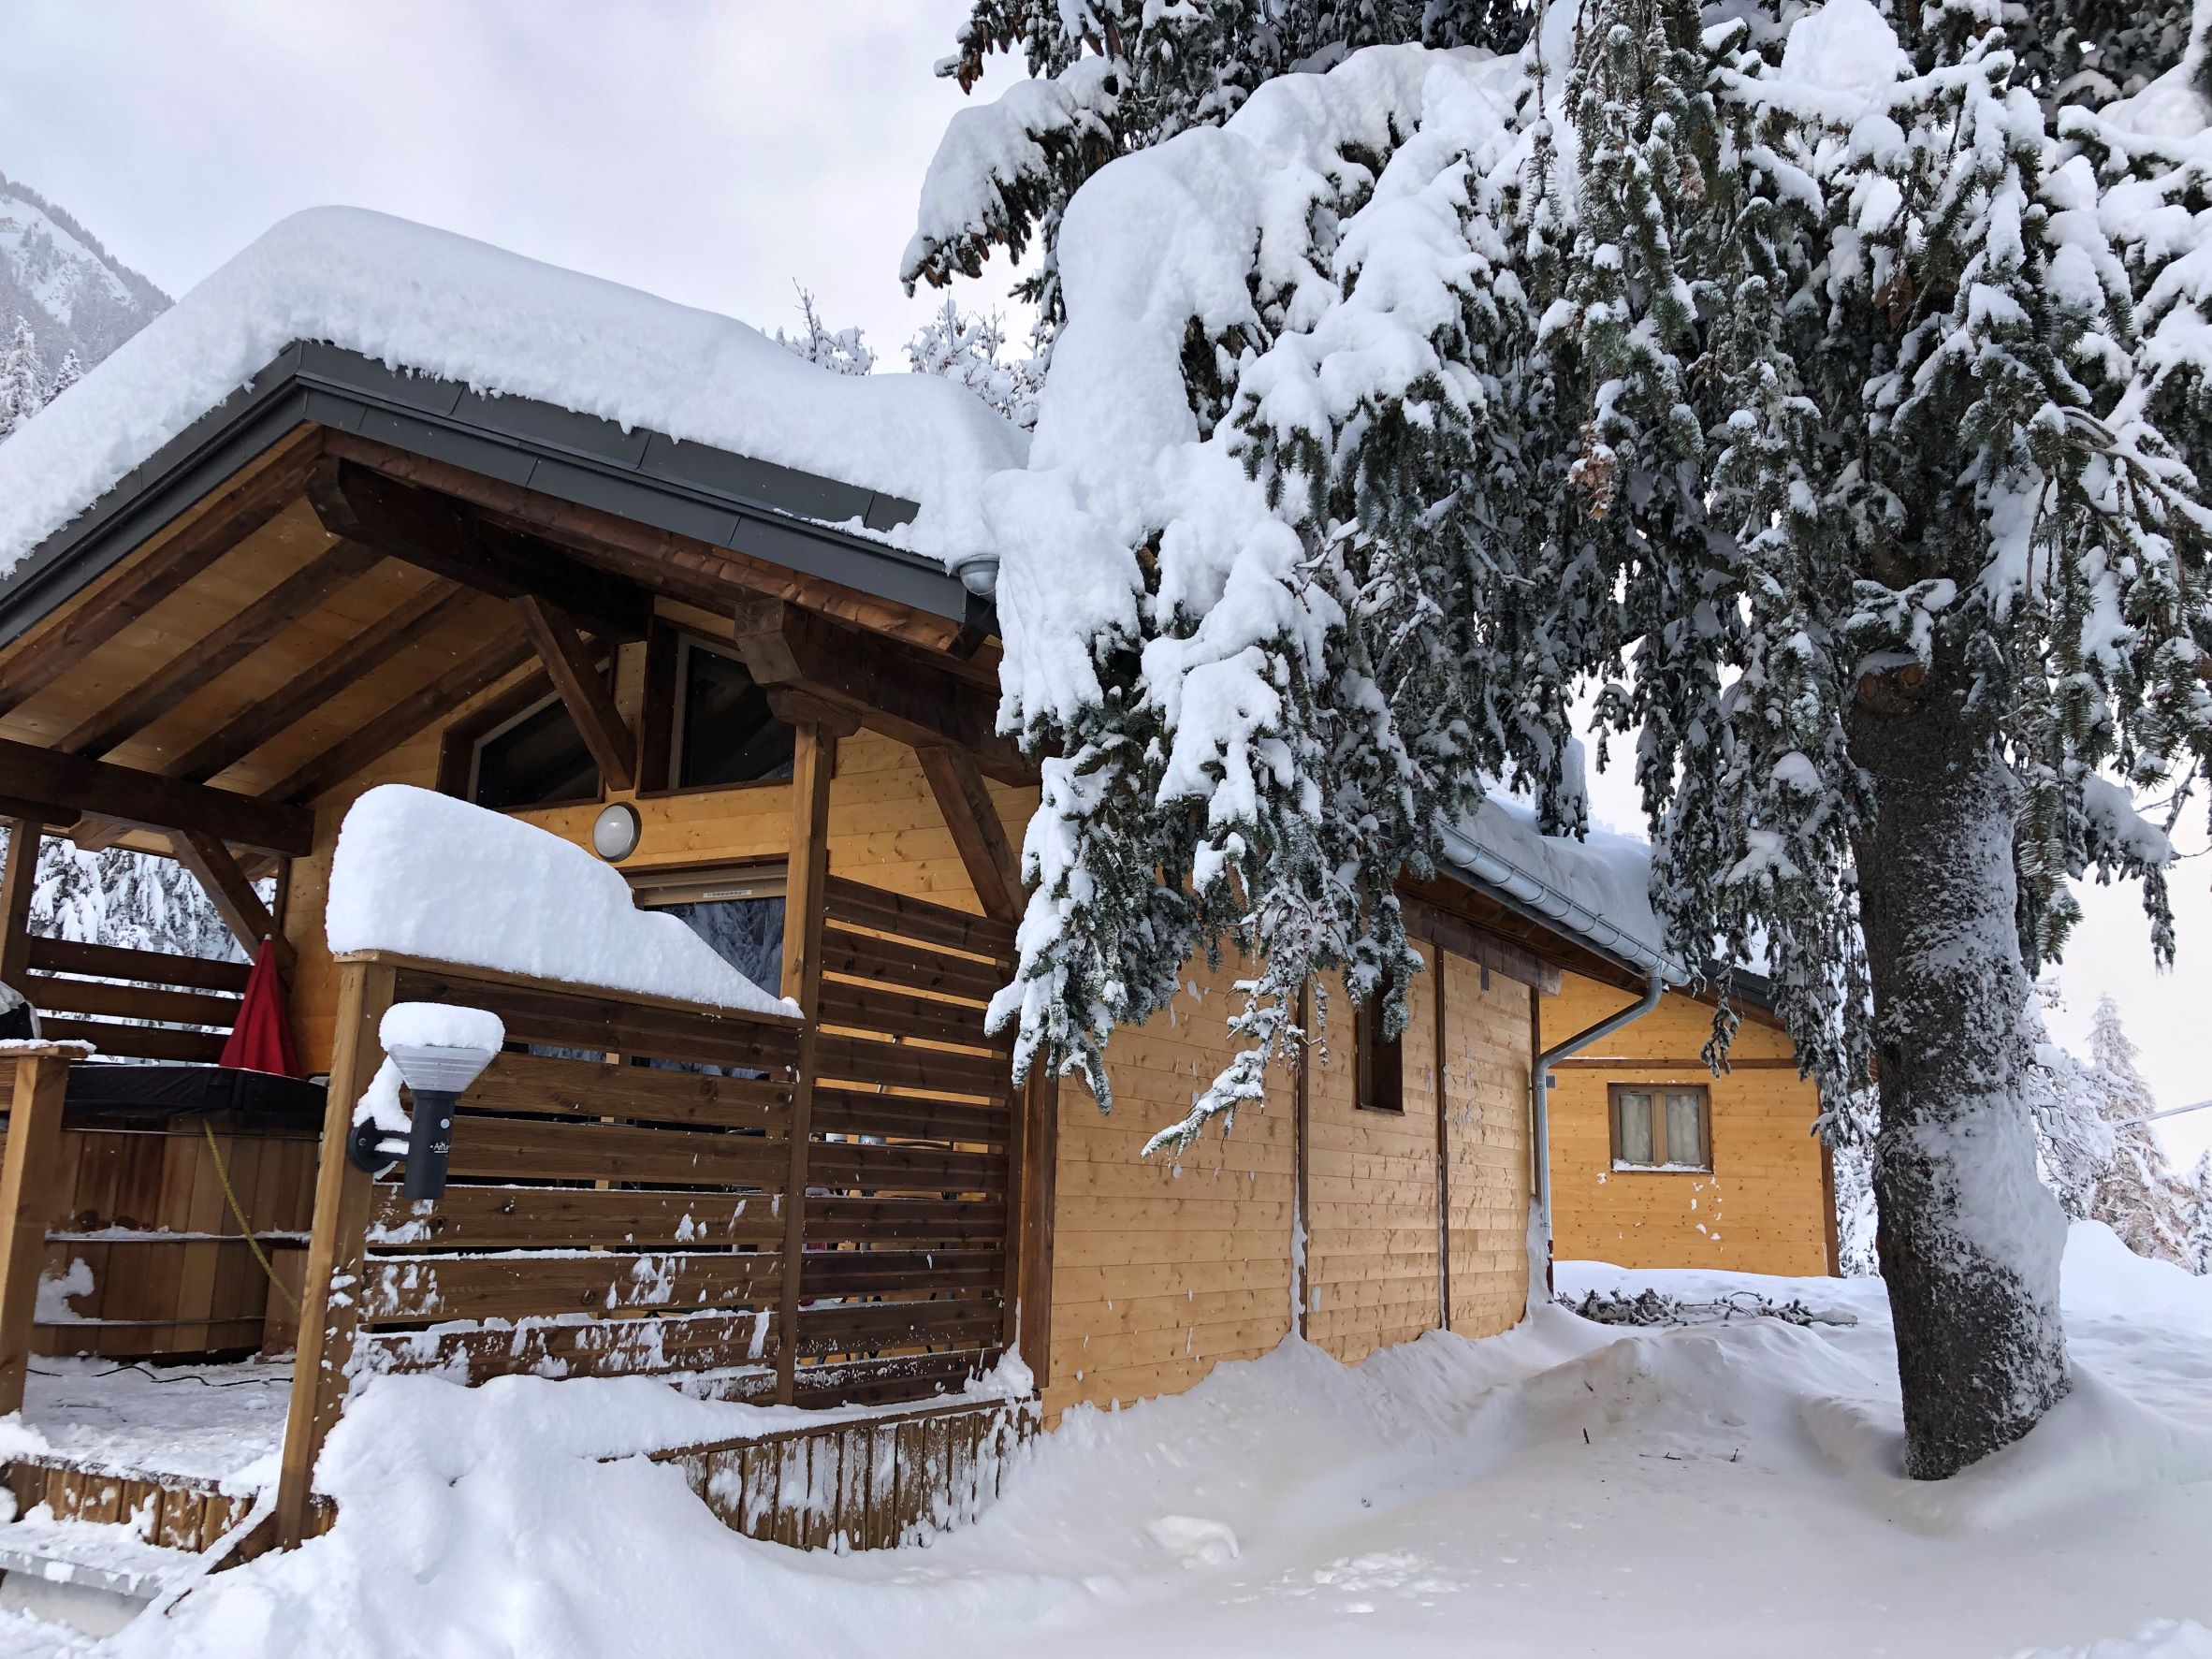 Accommodation - Gamme Chrystal - Chalet Hermine 24 M² 1 Bedroom + Semi-Covered Terrace 12M² With Nordic Bath - Camping Les Lanchettes